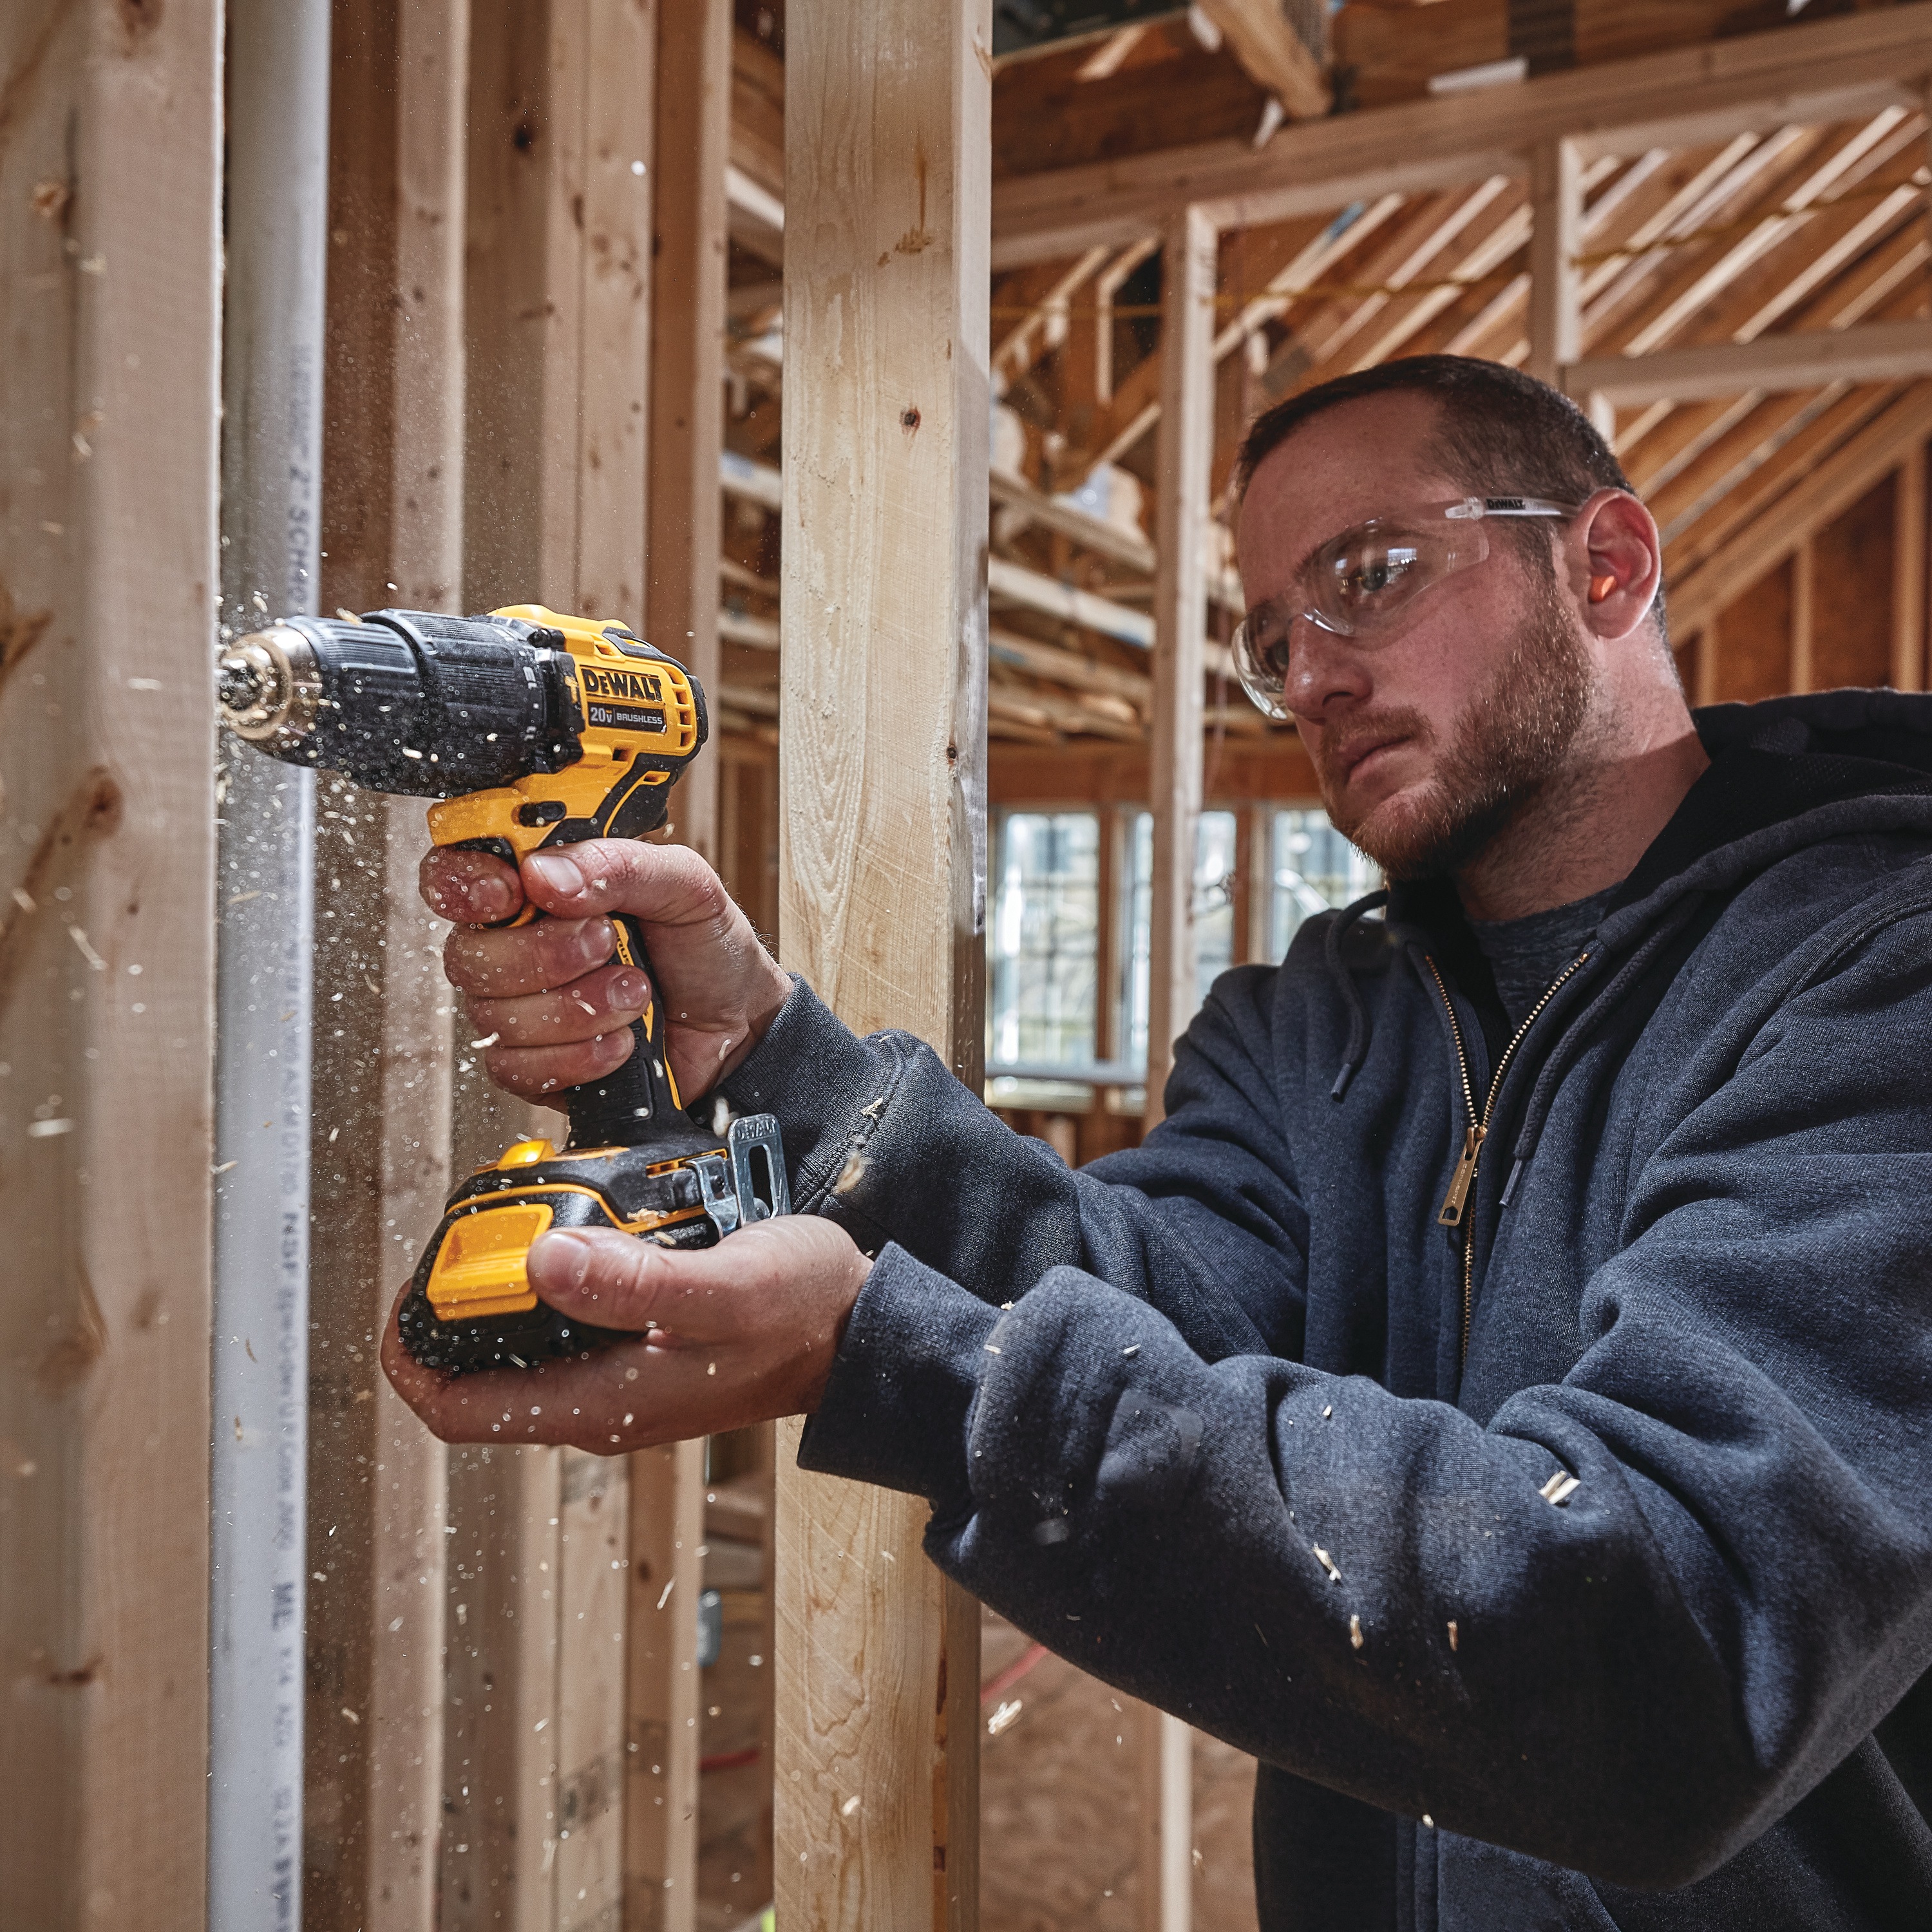 ATOMIC Brushless Compact Cordless half inch Hammer drill driver  is being used by a person to drill  wooden plank.